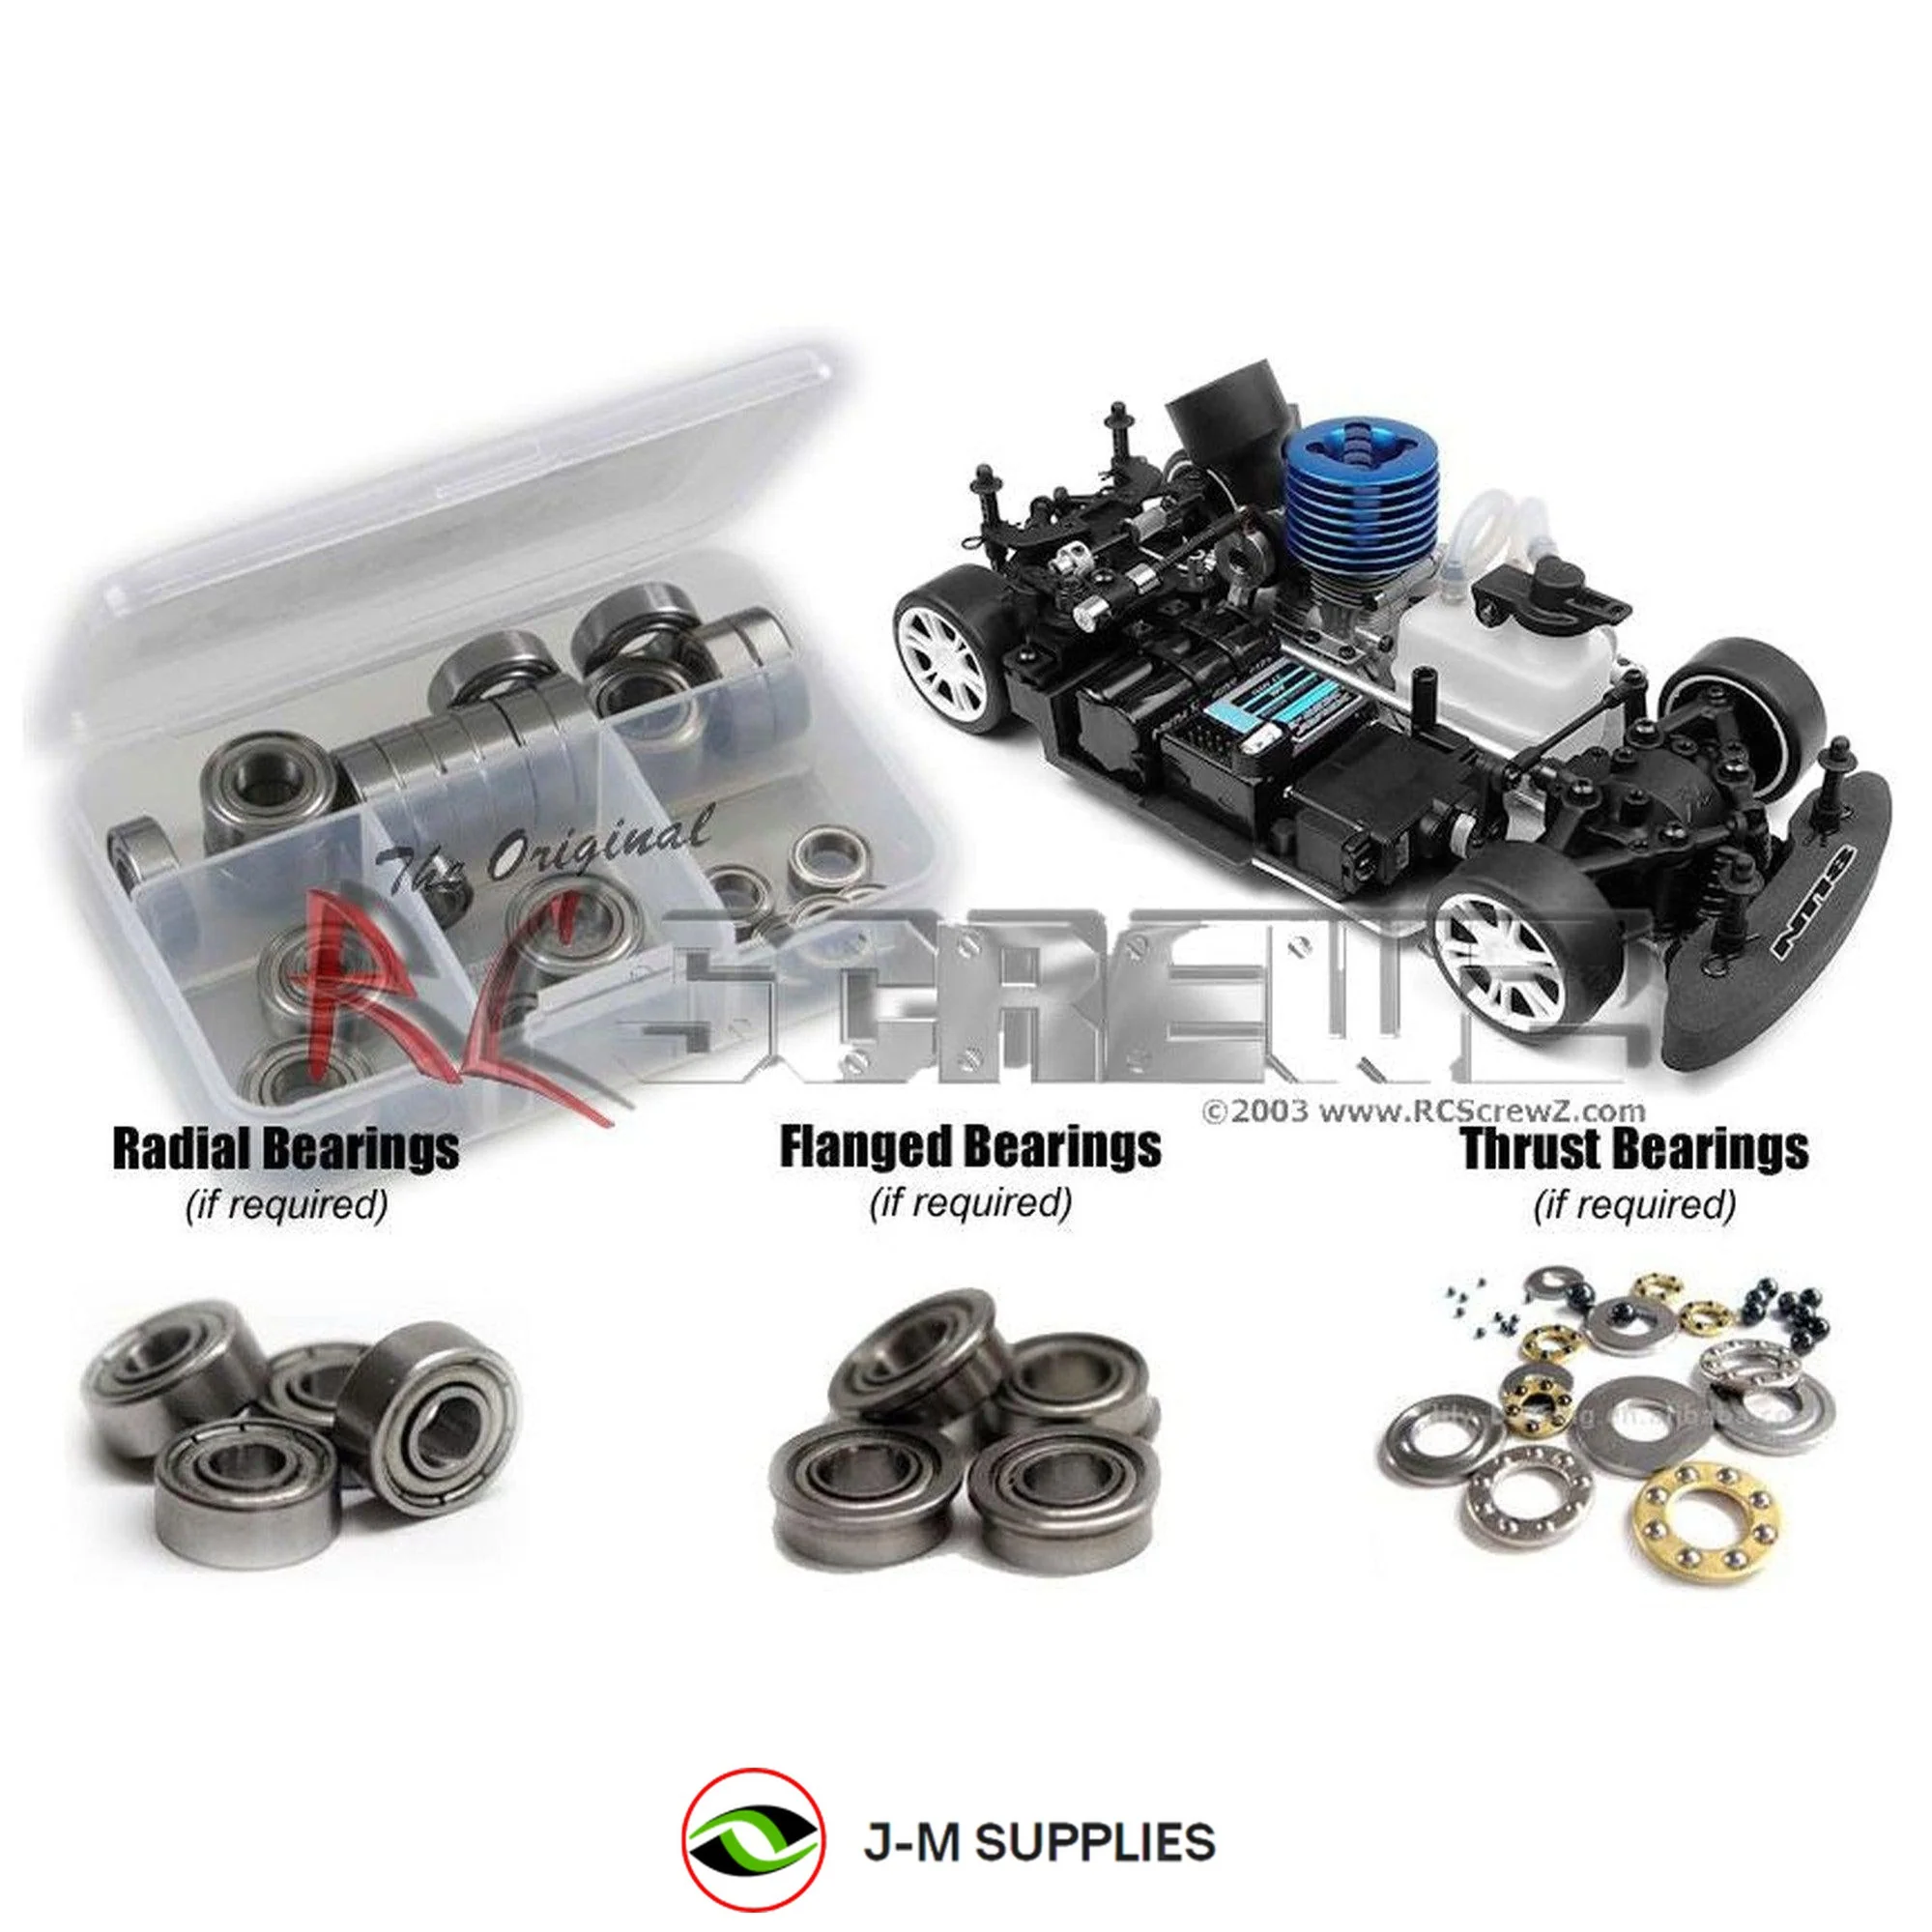 RCScrewZ Metal Shielded Bearing Kit xra010b for XRAY NT18T #380700 | PRO - Picture 1 of 12